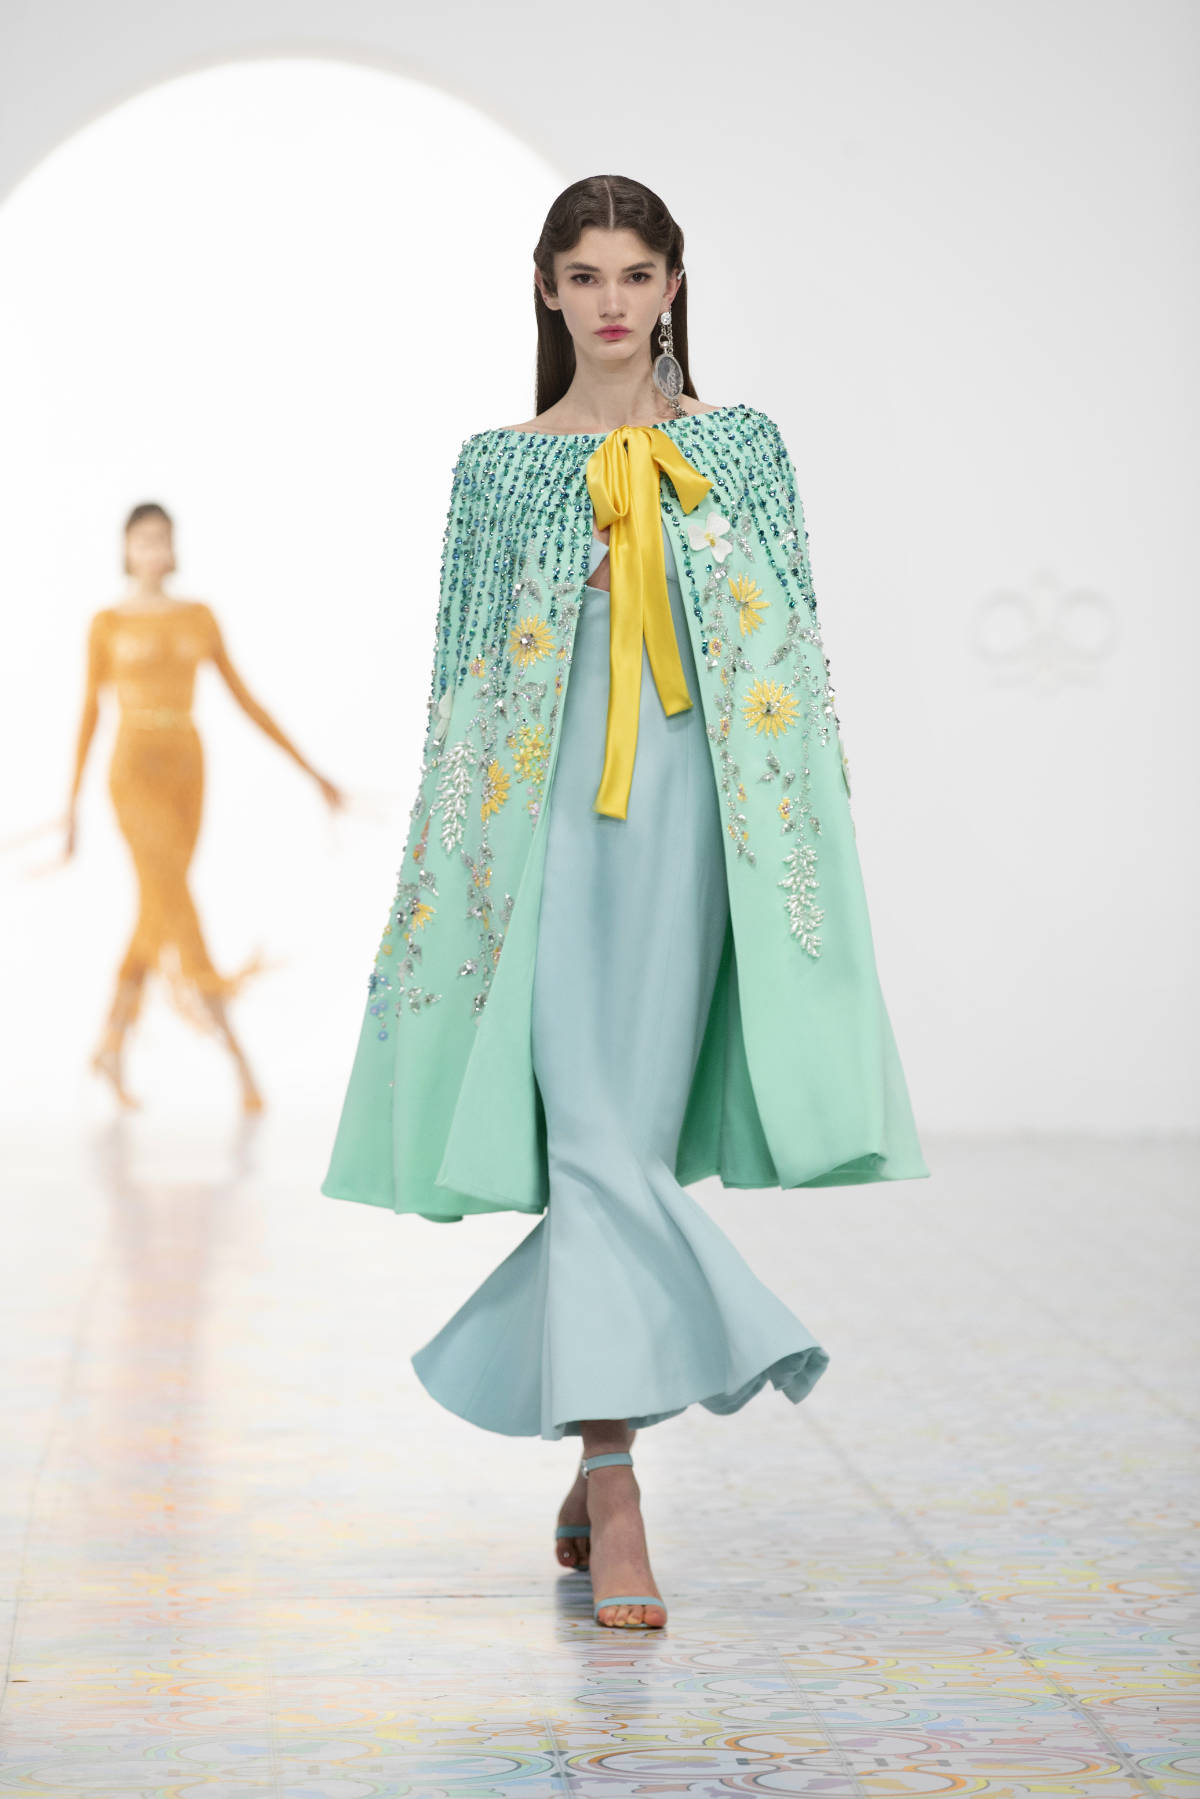 Georges Hobeika Presents Its New Couture Spring Summer 2022 Collection: First Kiss